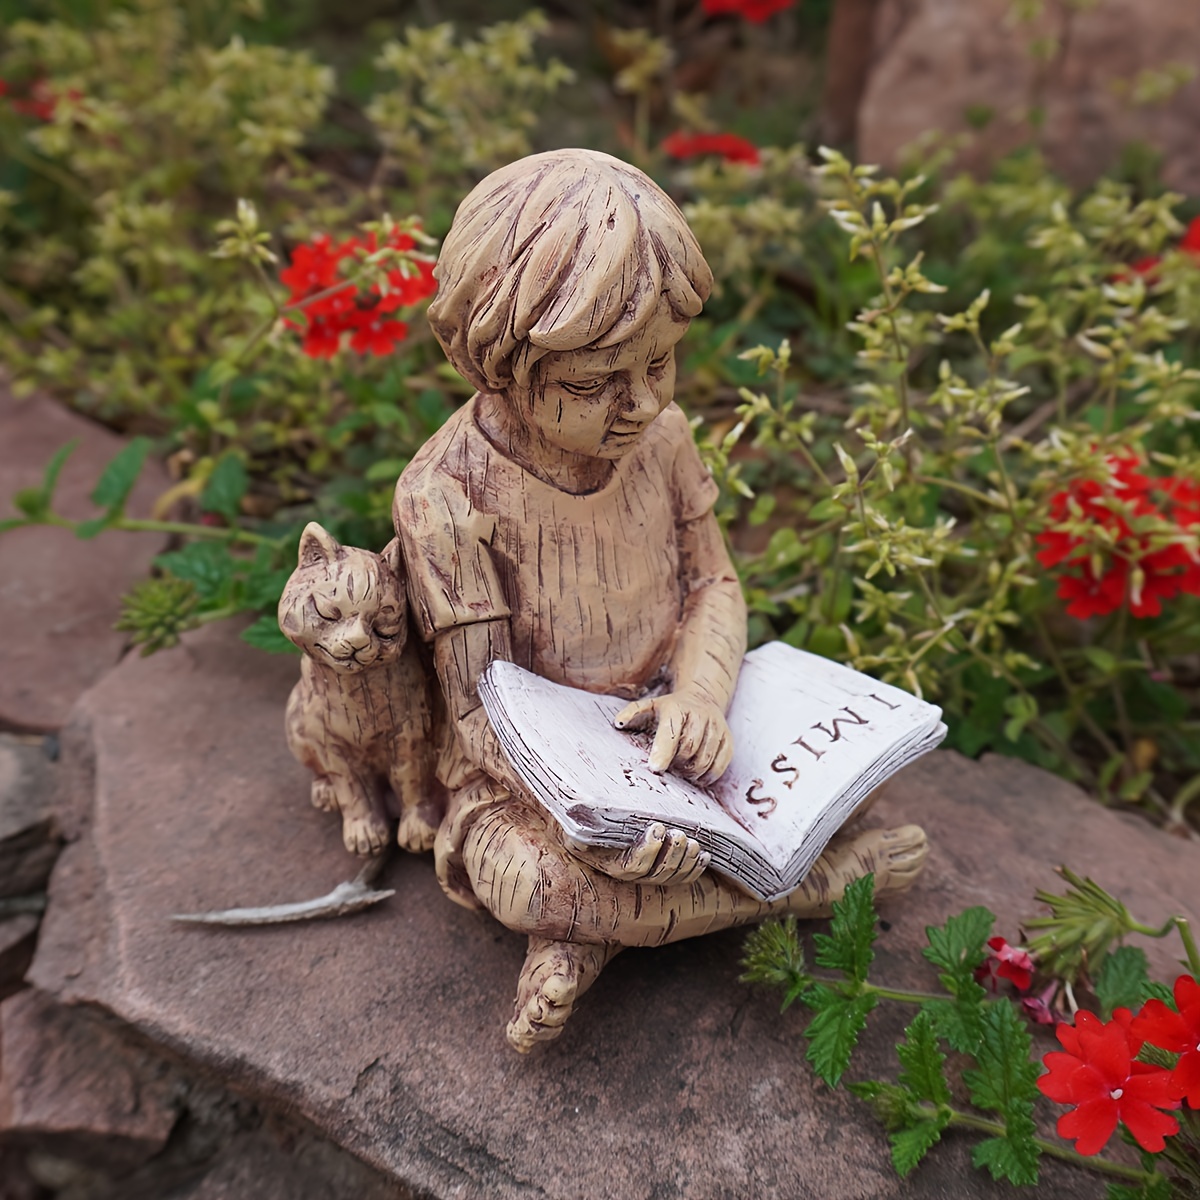 

literary" Charming Reading Boy & Cat Statue - Resin Garden Ornament, Perfect For Outdoor Decor, Thanksgiving Theme